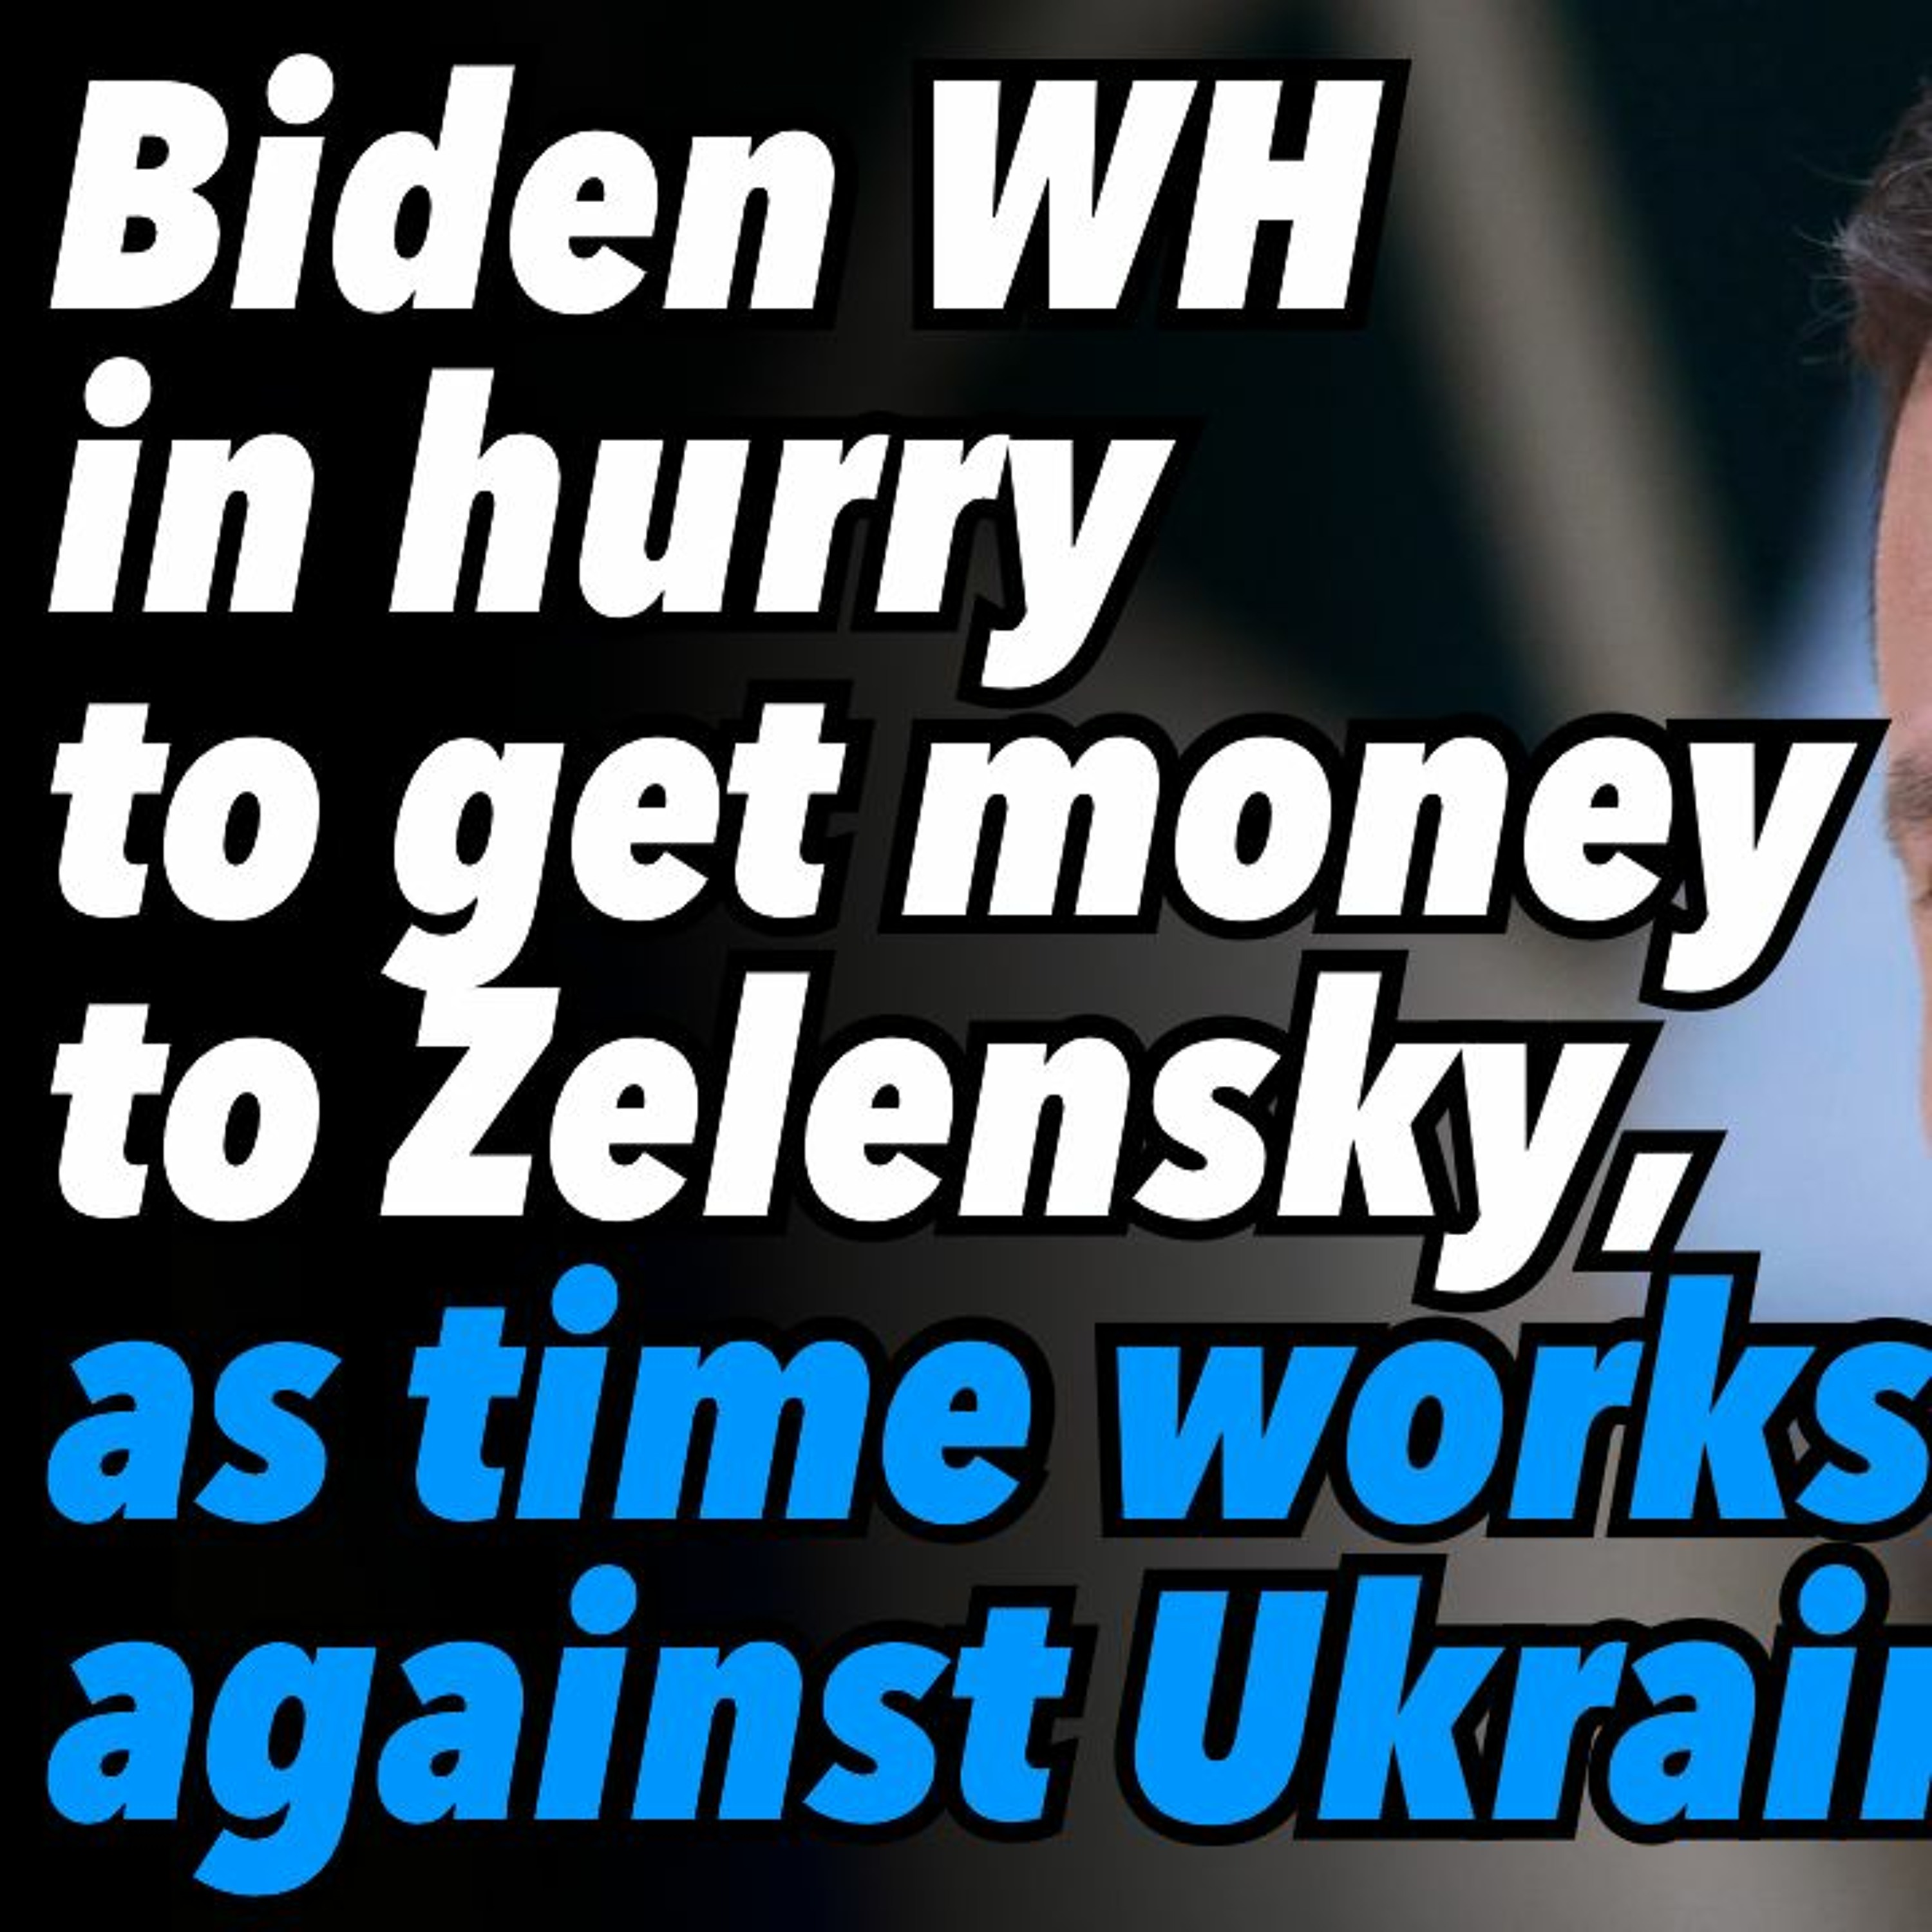 Biden WH in hurry to get money to Zelensky, as time works against Ukraine